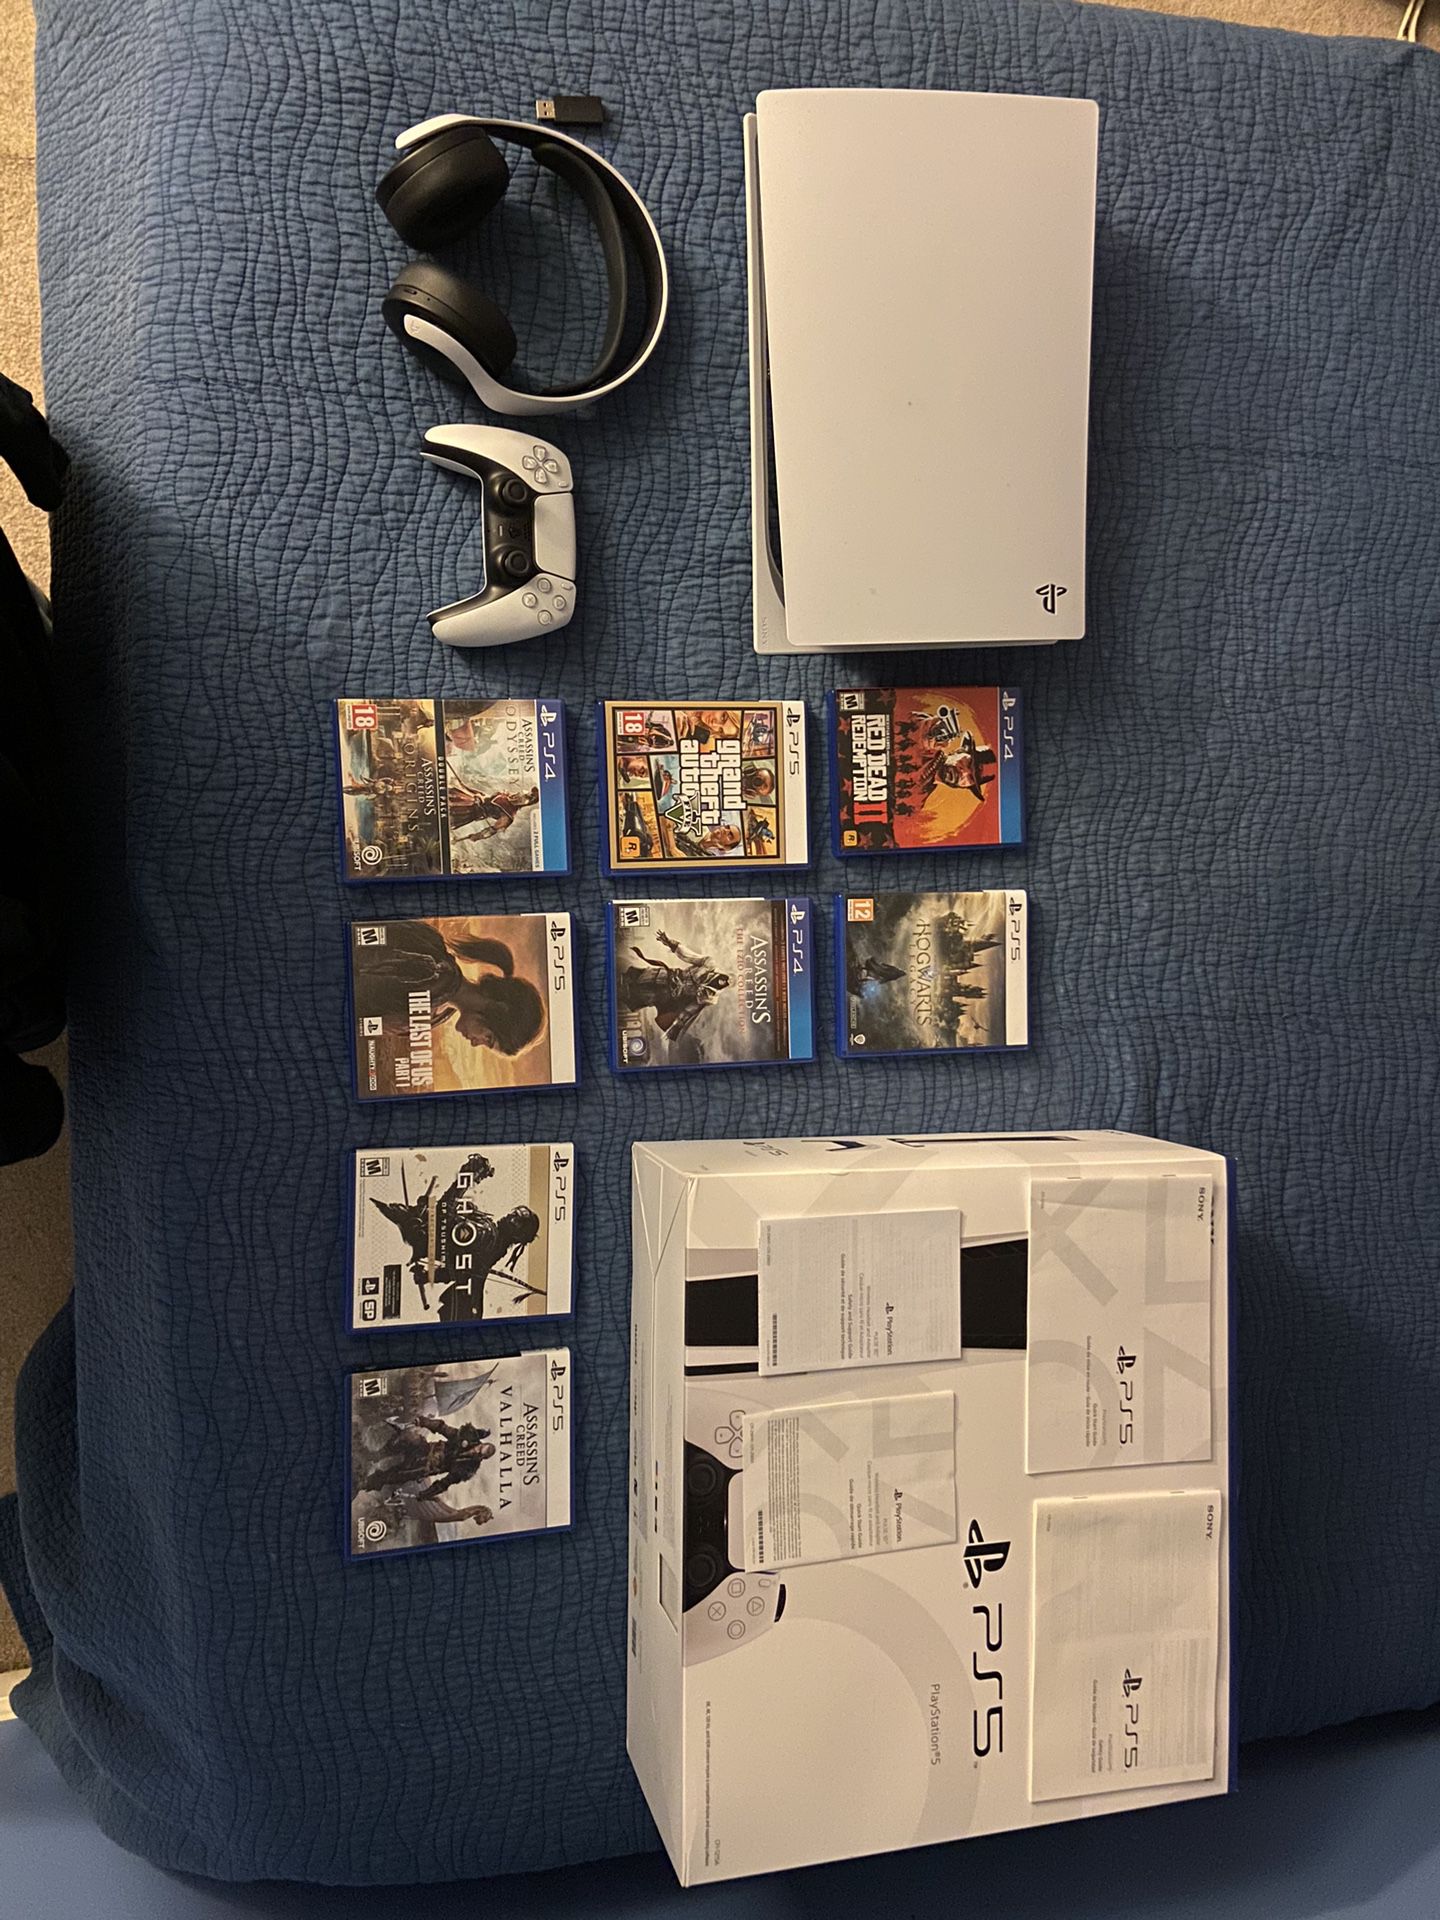 PS5 Headphones and Games